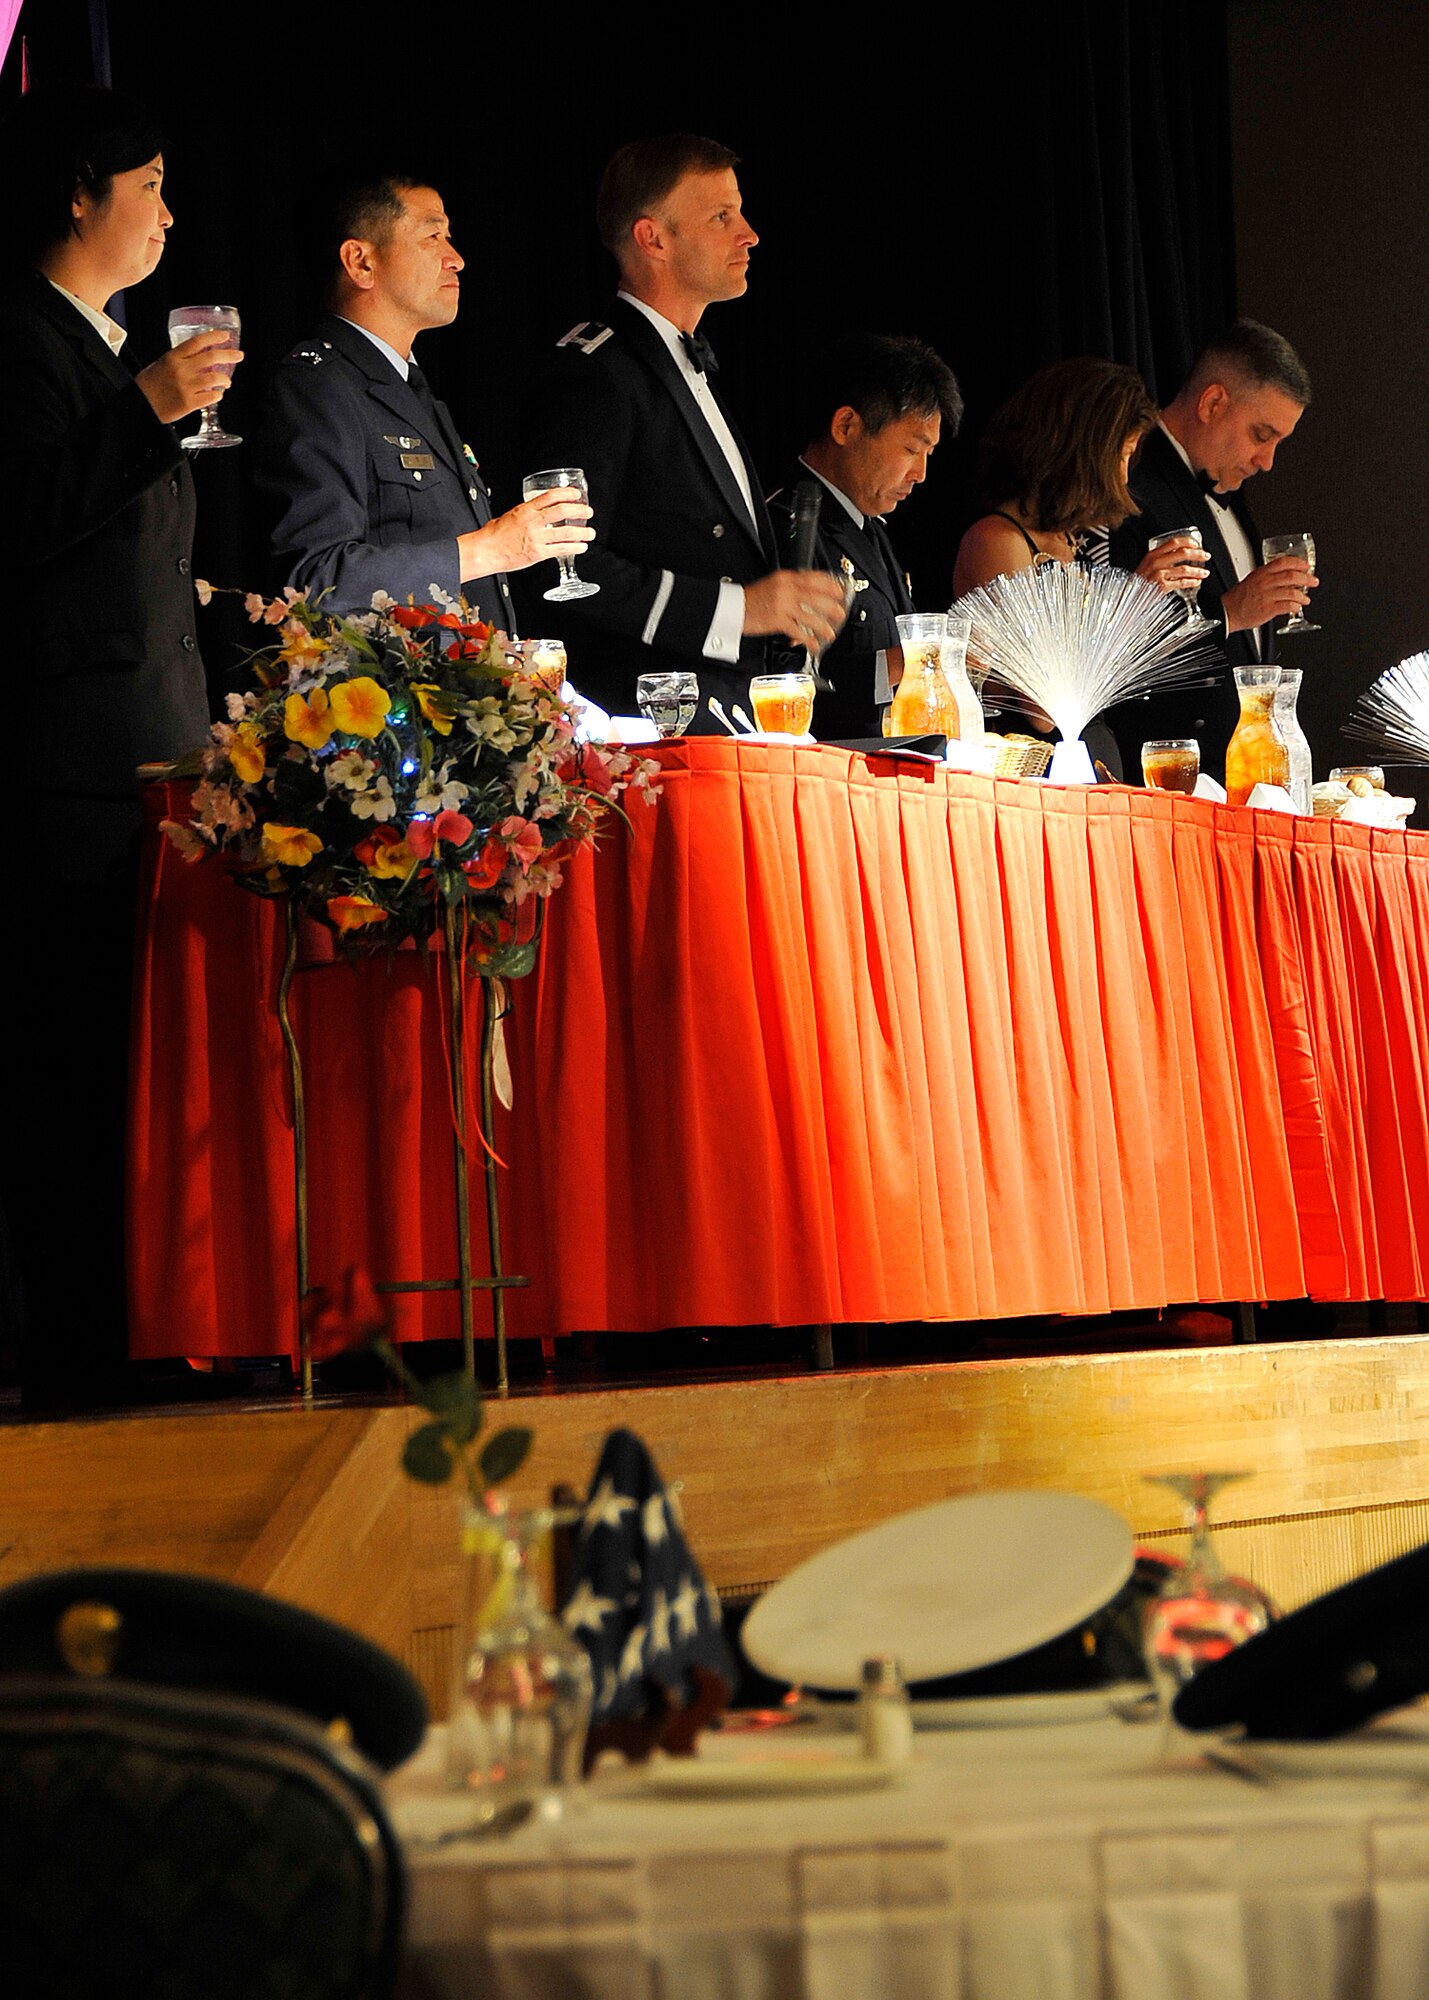 MISAWA AIR BASE, Japan -- Col. RC Craig, 35th Fighter Wing vice commander and his official party make several toasts during the 3rd Annual Bilateral Enlisted Dining-Out June 5, 2009. This was Colonel Craig's first dining-out as the 35th Fighter Wing vice commander. (U.S. Air Force photo by Senior Airman Chad C. Strohmeyer)